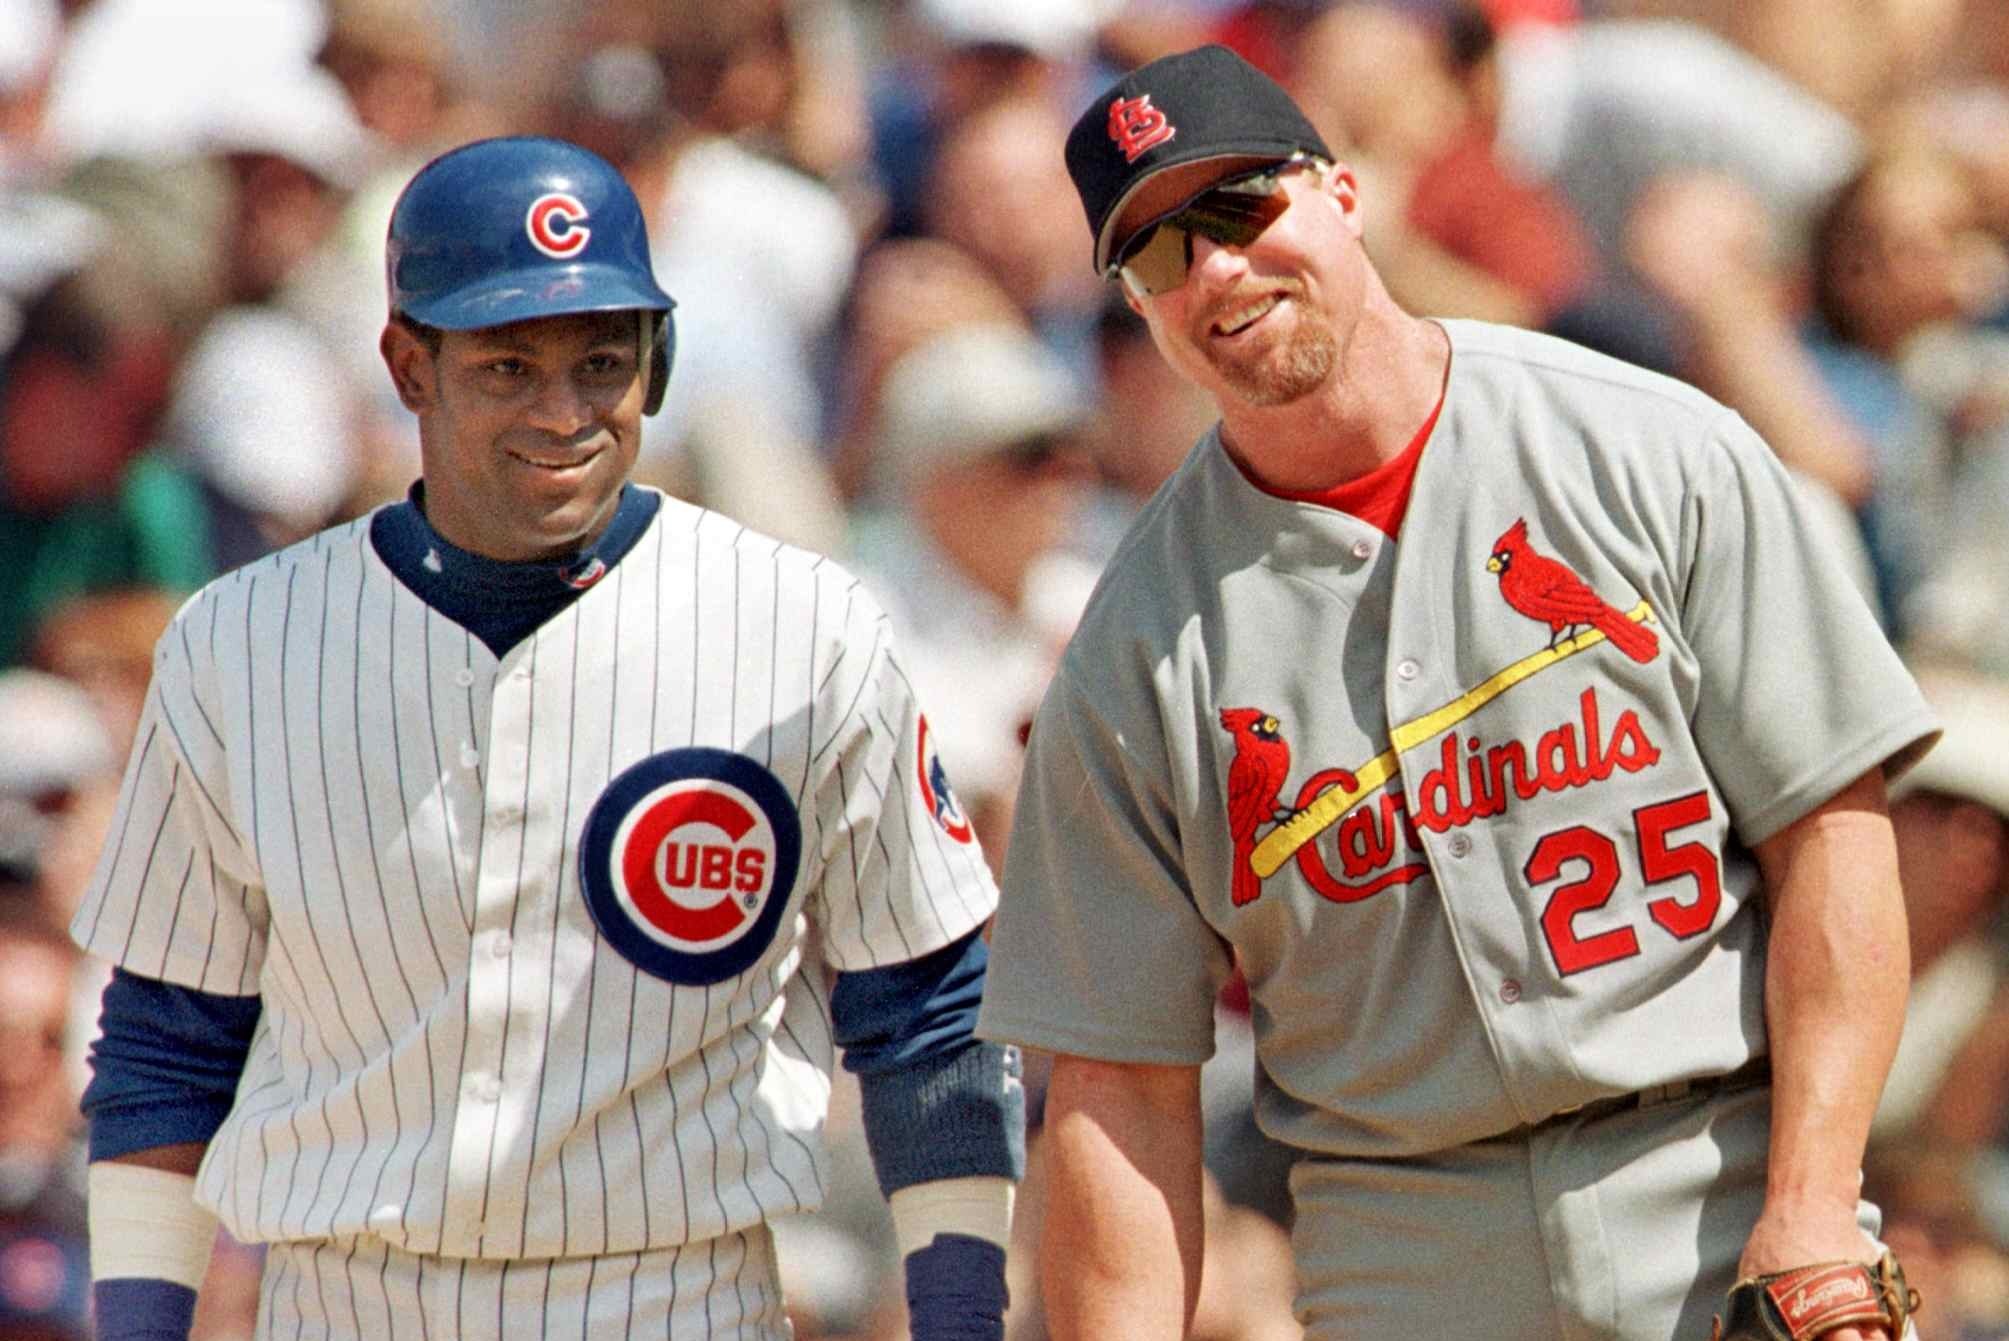 McGwire pictures with his son Matt